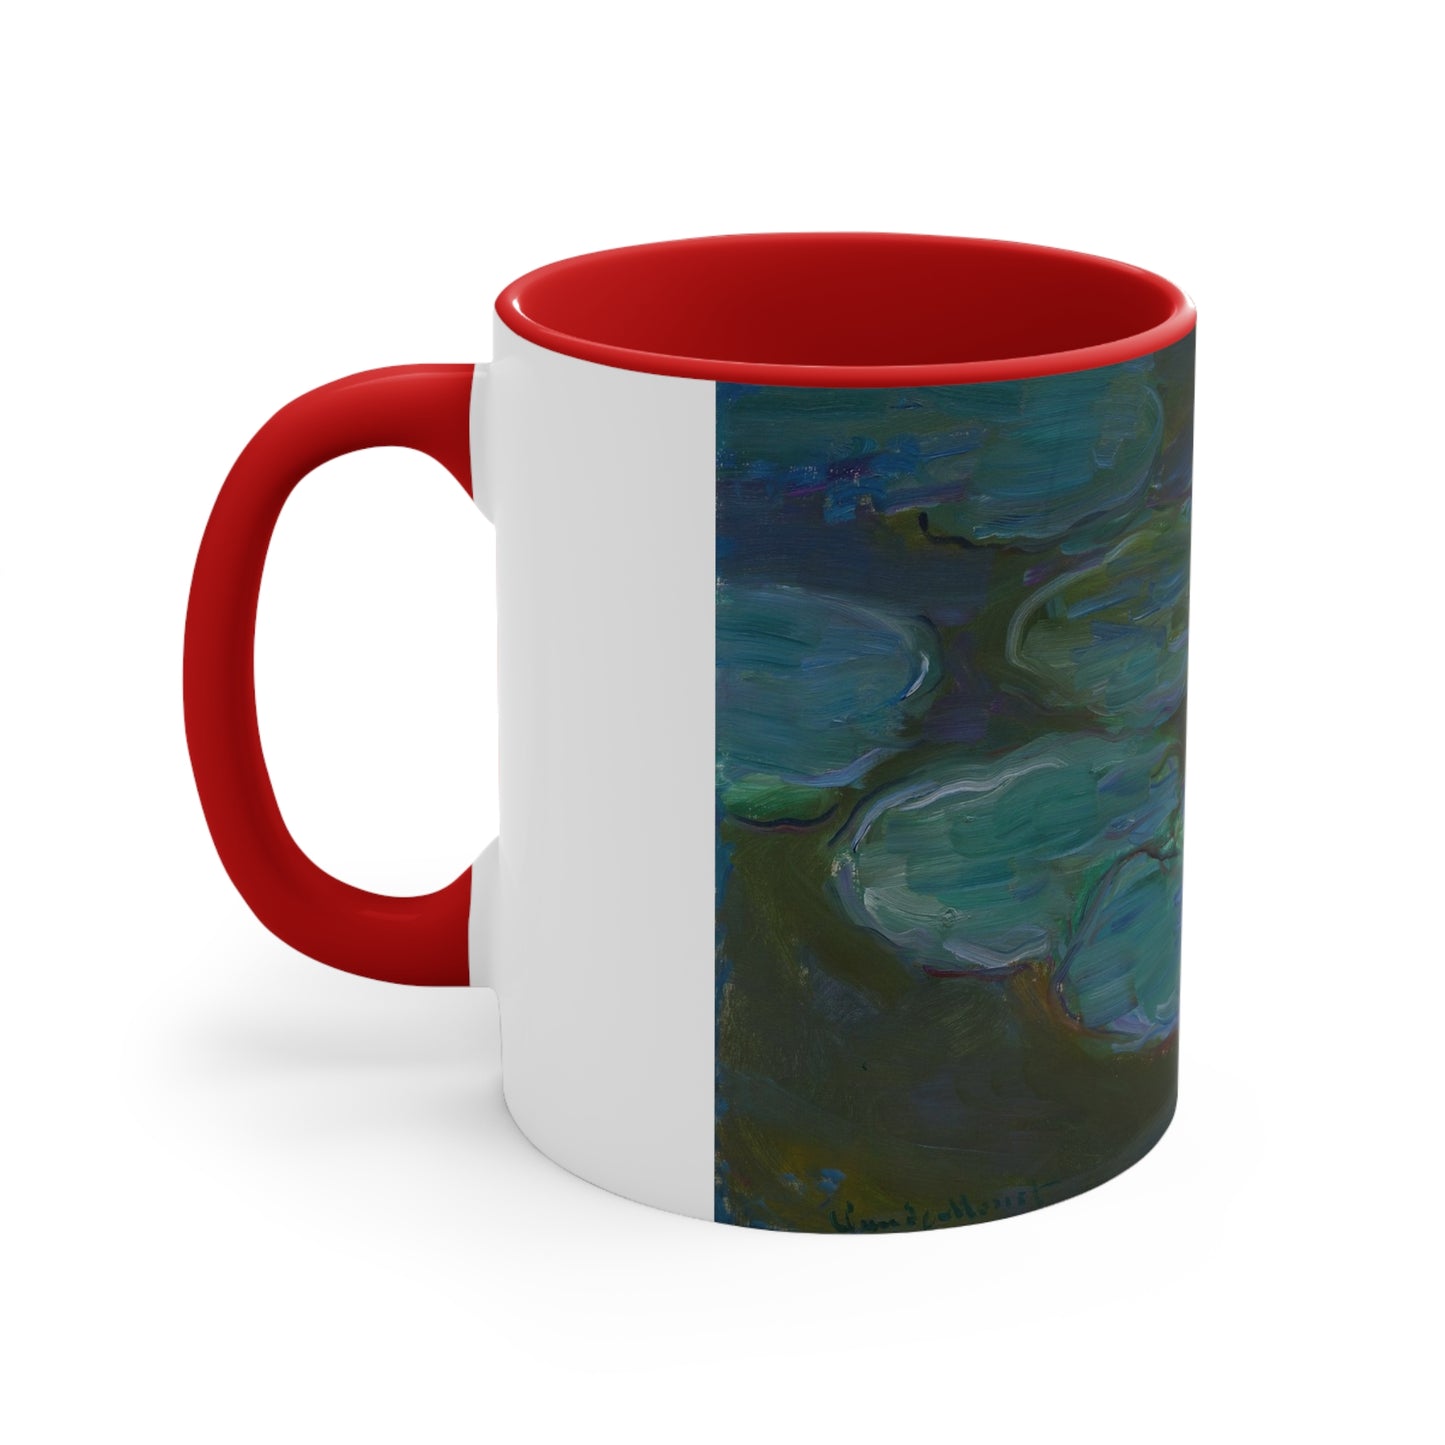 a red and white coffee mug with a painting on it